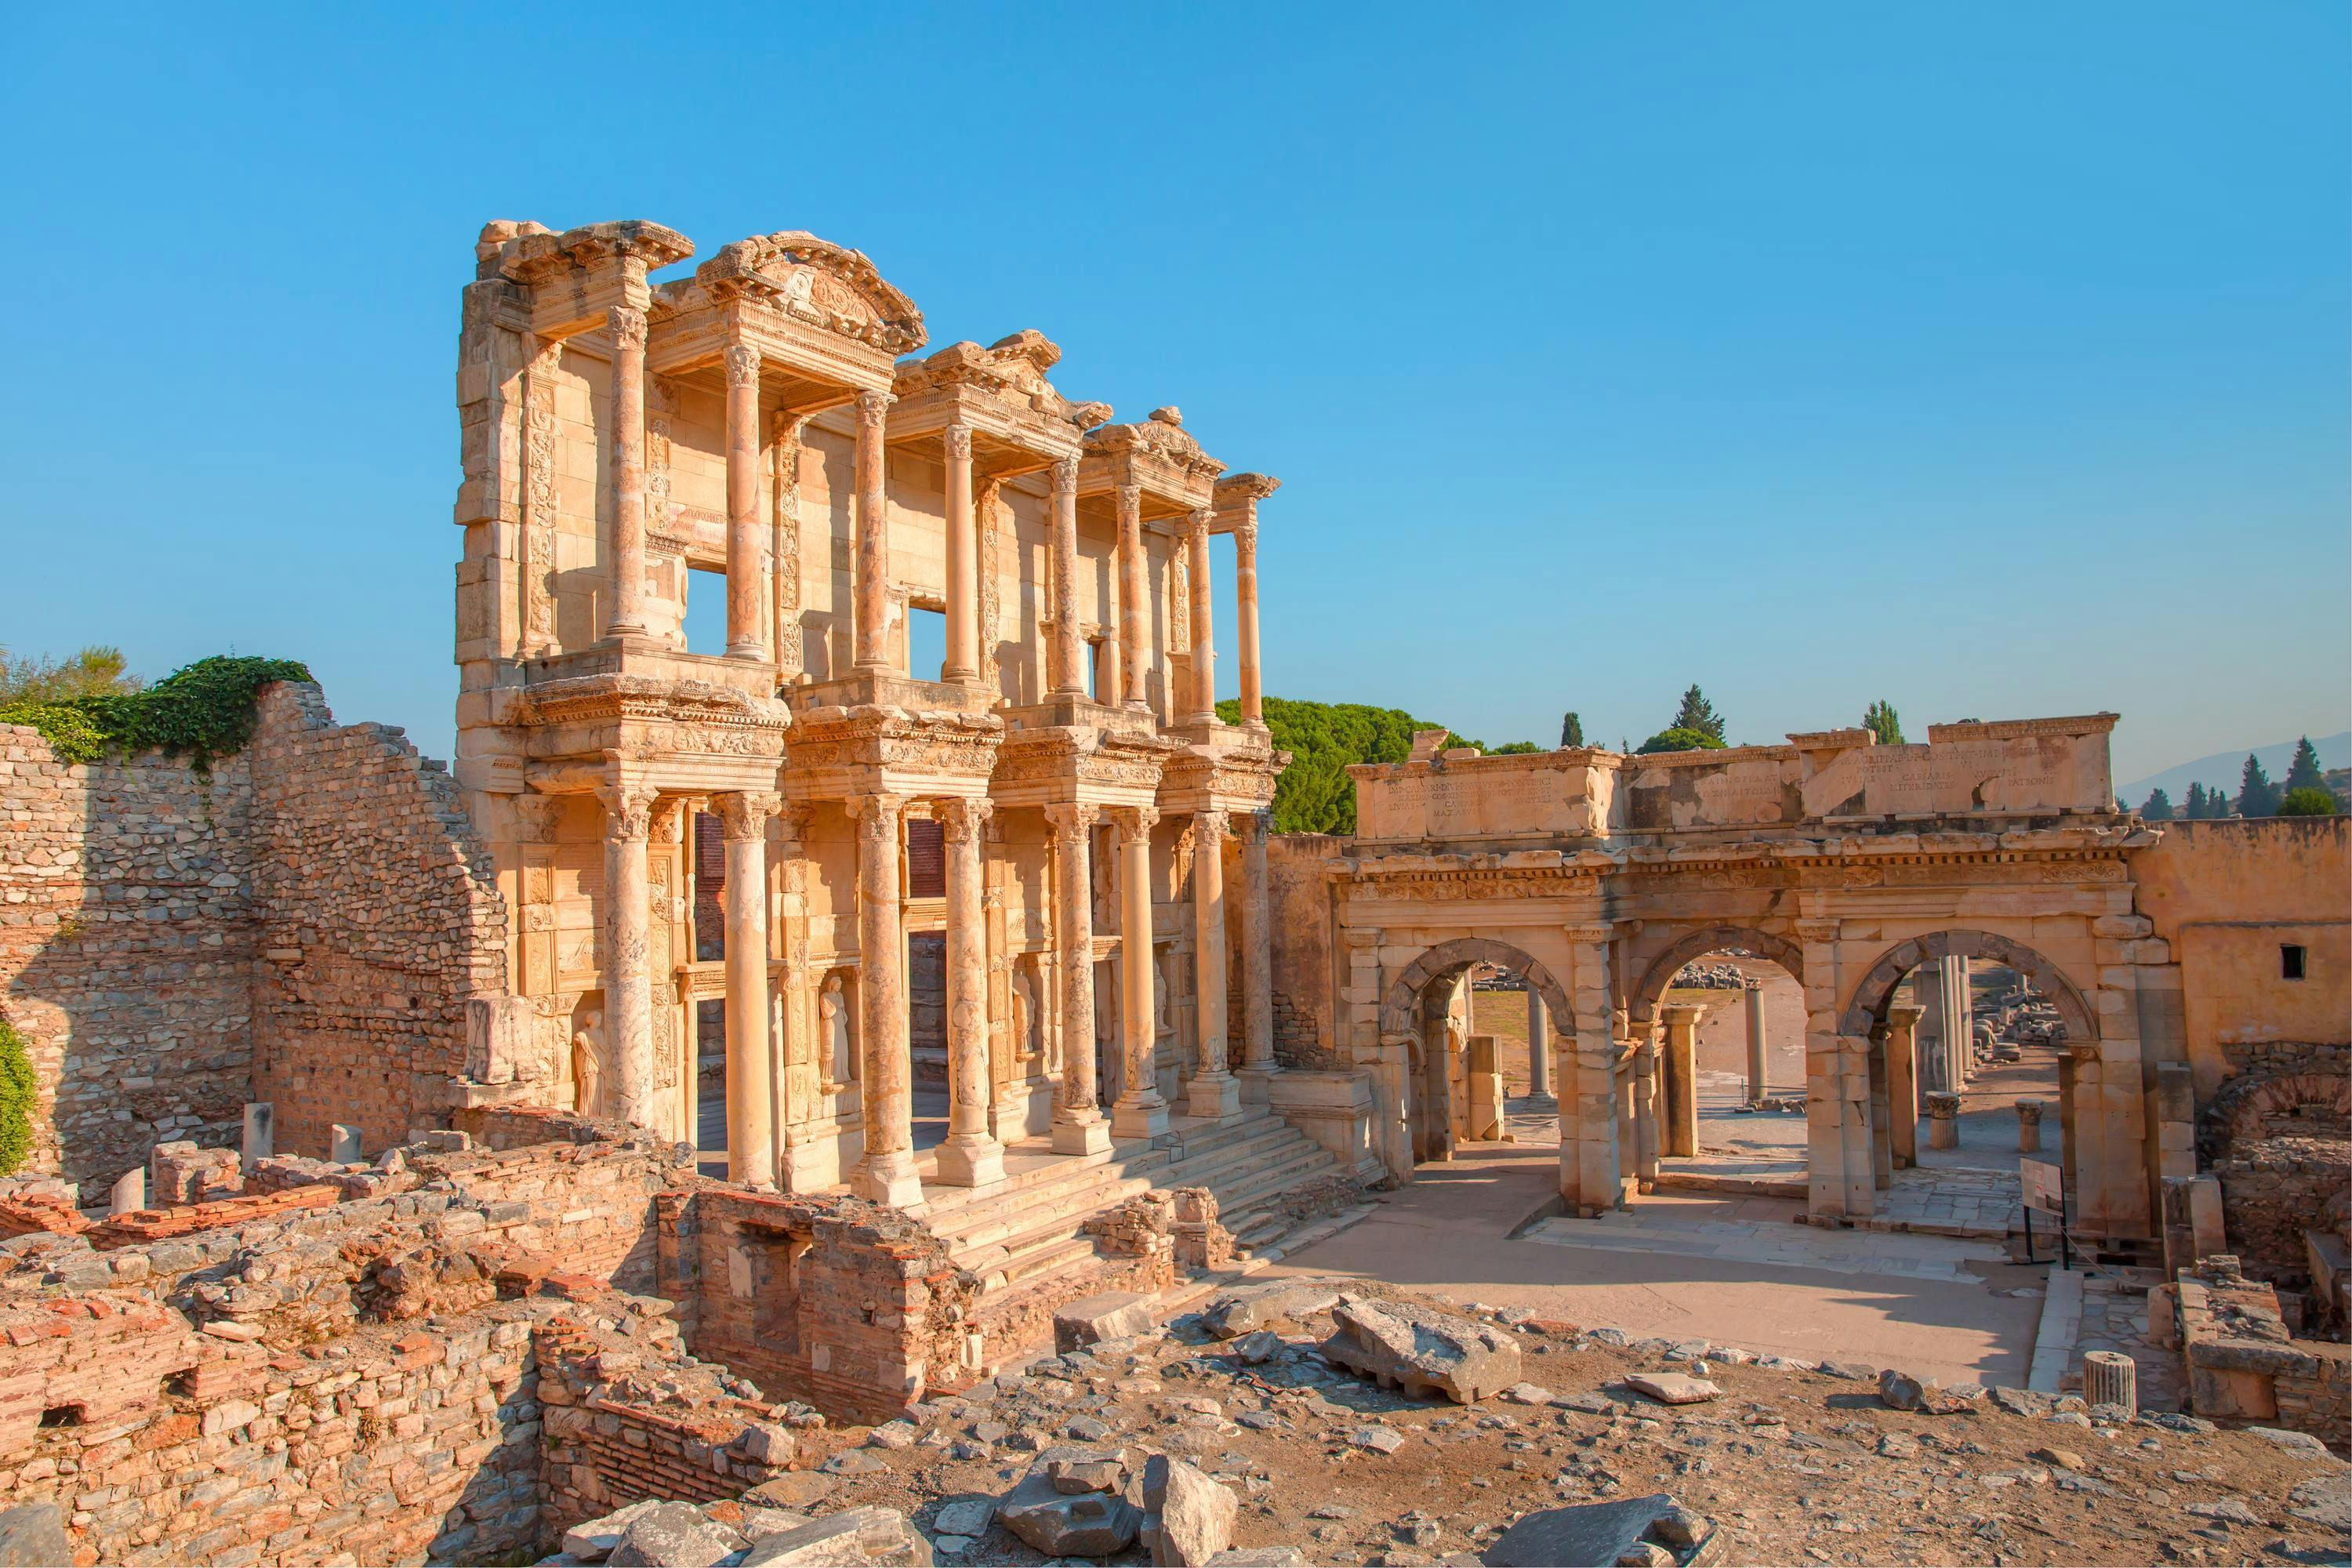 Library of Celsus in the ancient city of Ephesus, a UNESCO World Heritage site in Izmir, Turkey